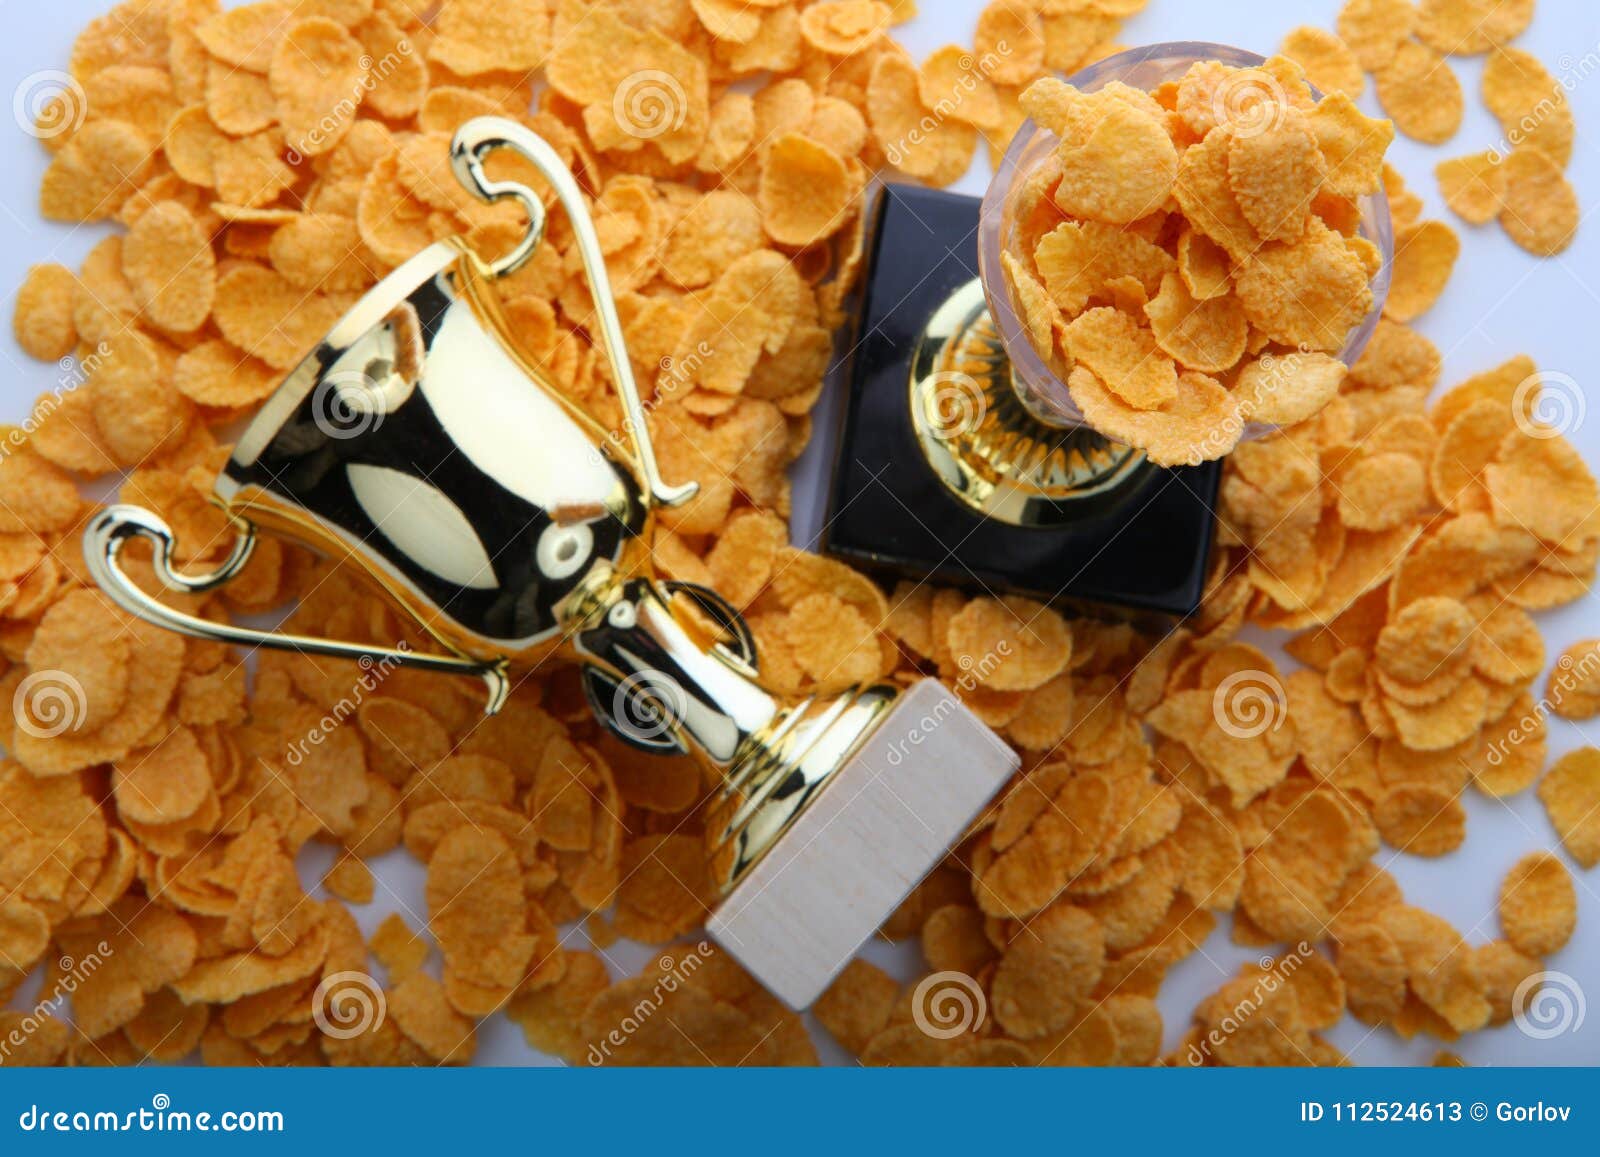 Corn Flakes Gold Cup Studio Quality Stock Image - Image of bowl, morning: 112524613